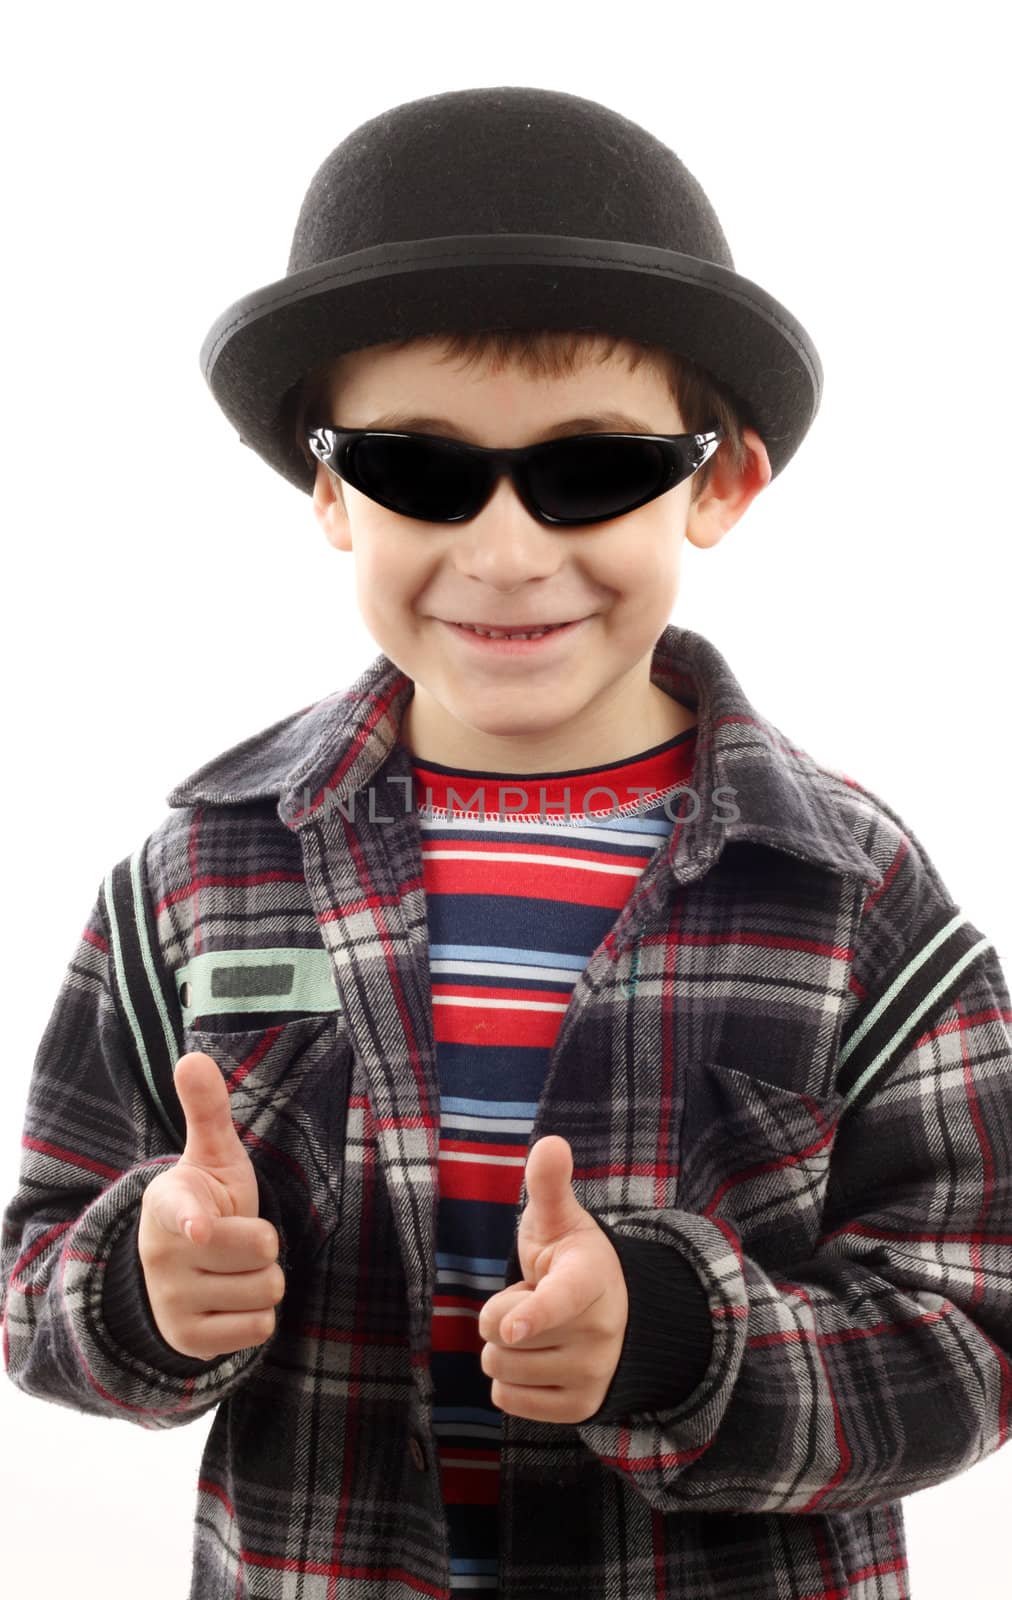 boy with sunglasses and hat by alexkosev